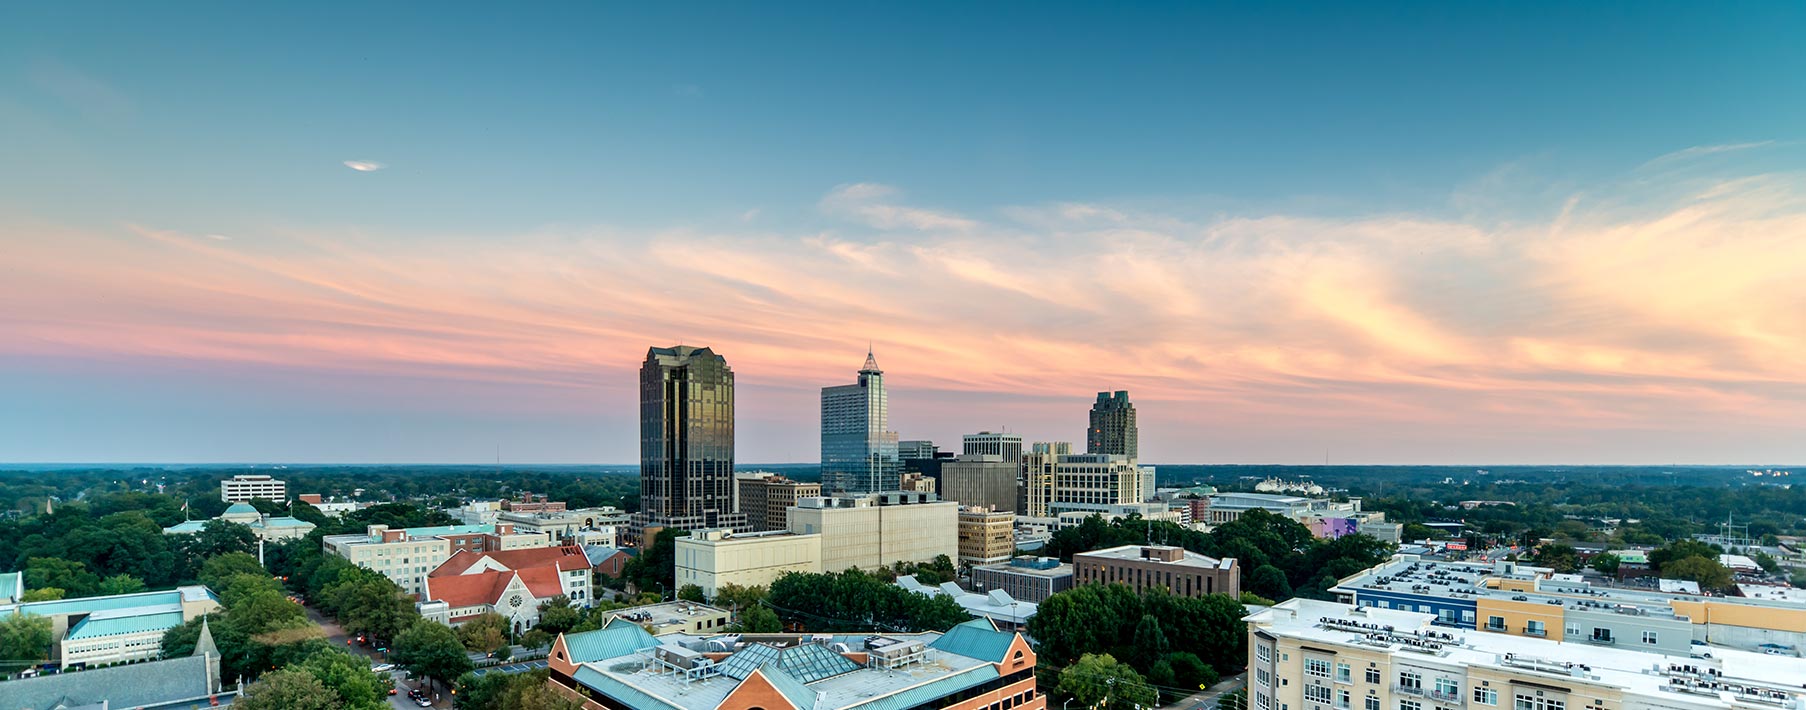 Image of the Raleigh city skyline